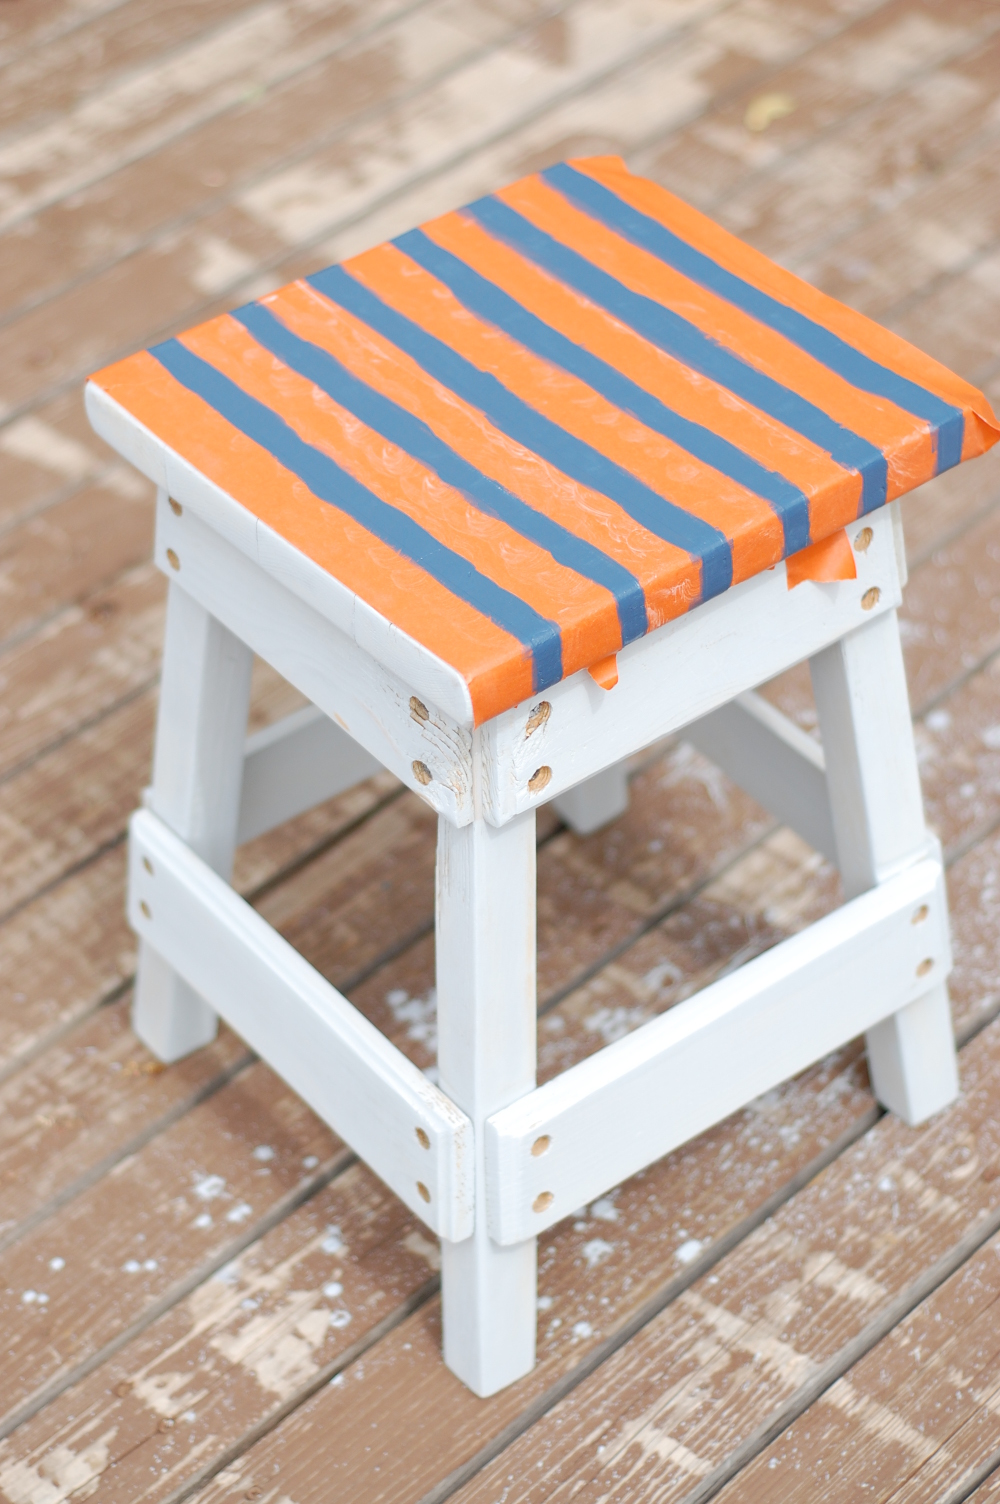 Nautical Stool Refinish - Turn a bland wood stool into a fun nautical themed piece, perfect for a bathroom or your oceanic-themed room!